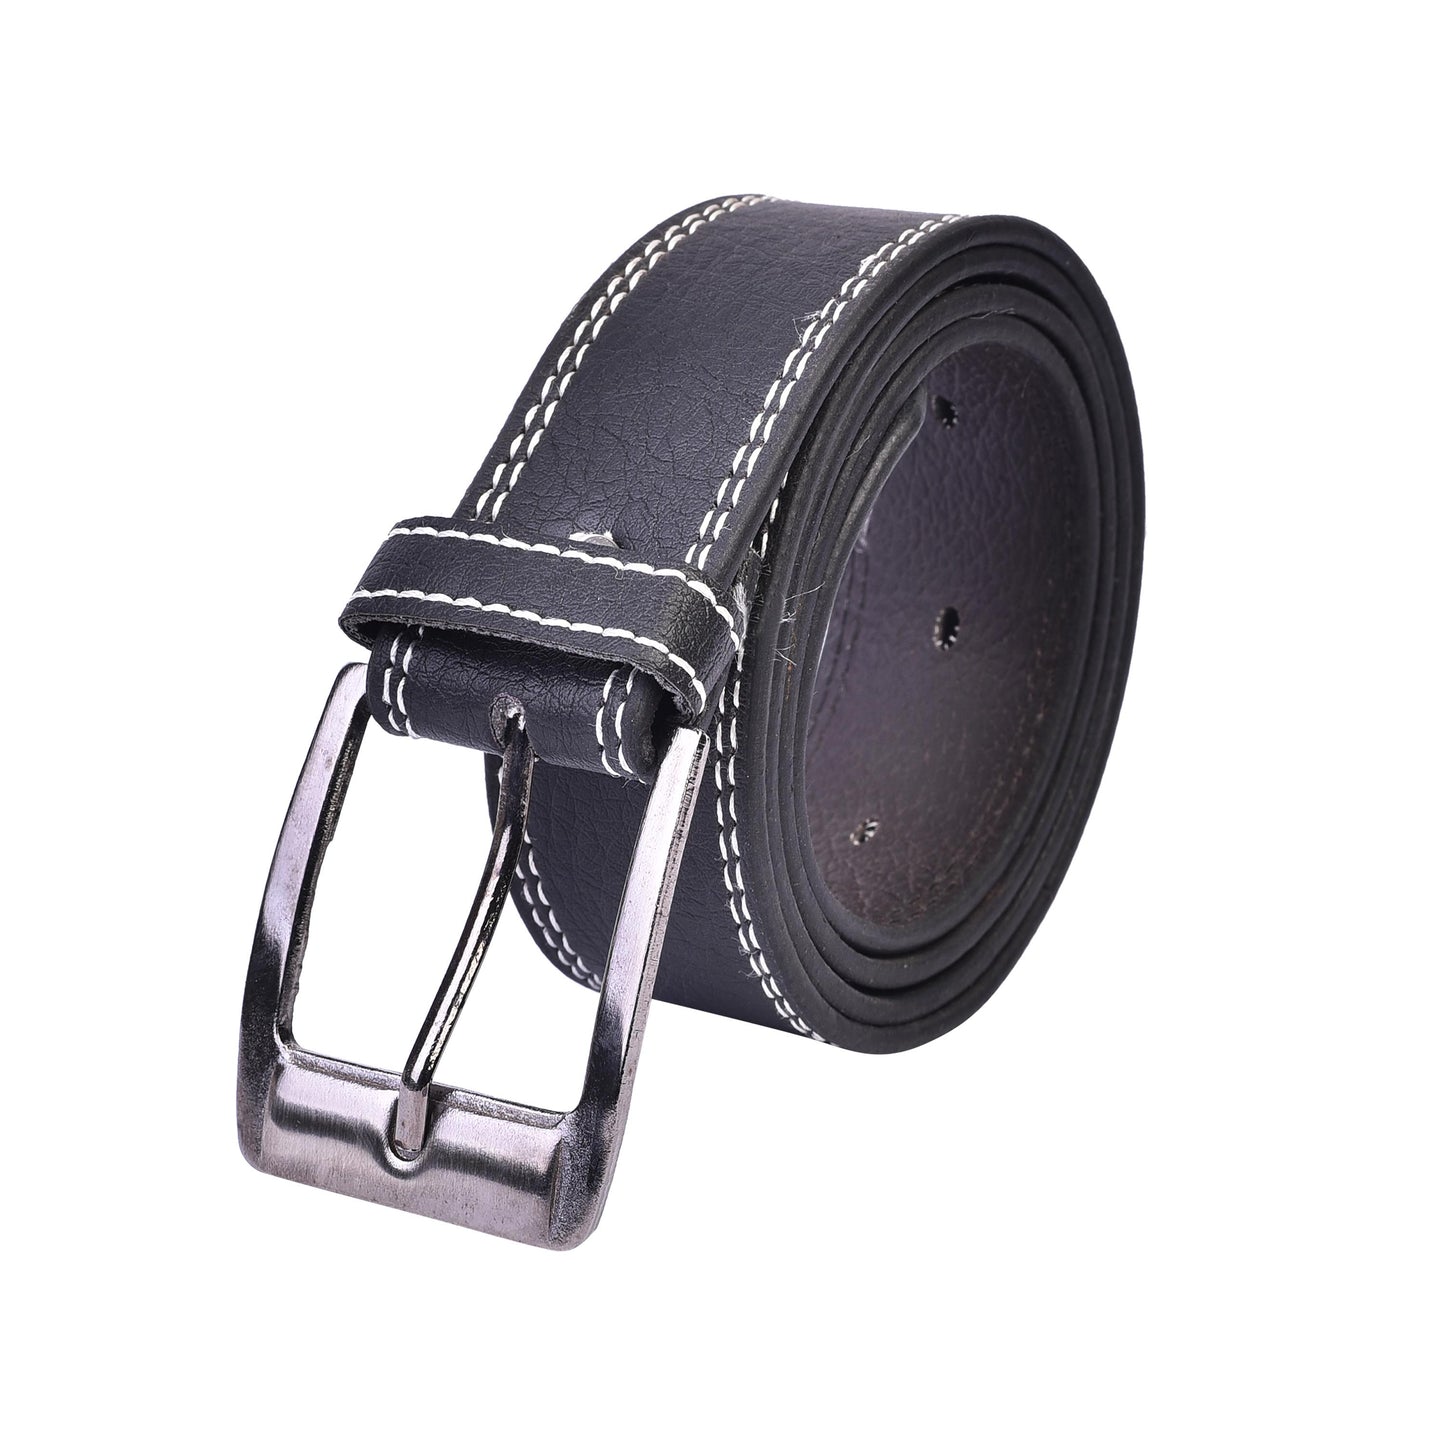 Men's Black casual Belt with white stitching